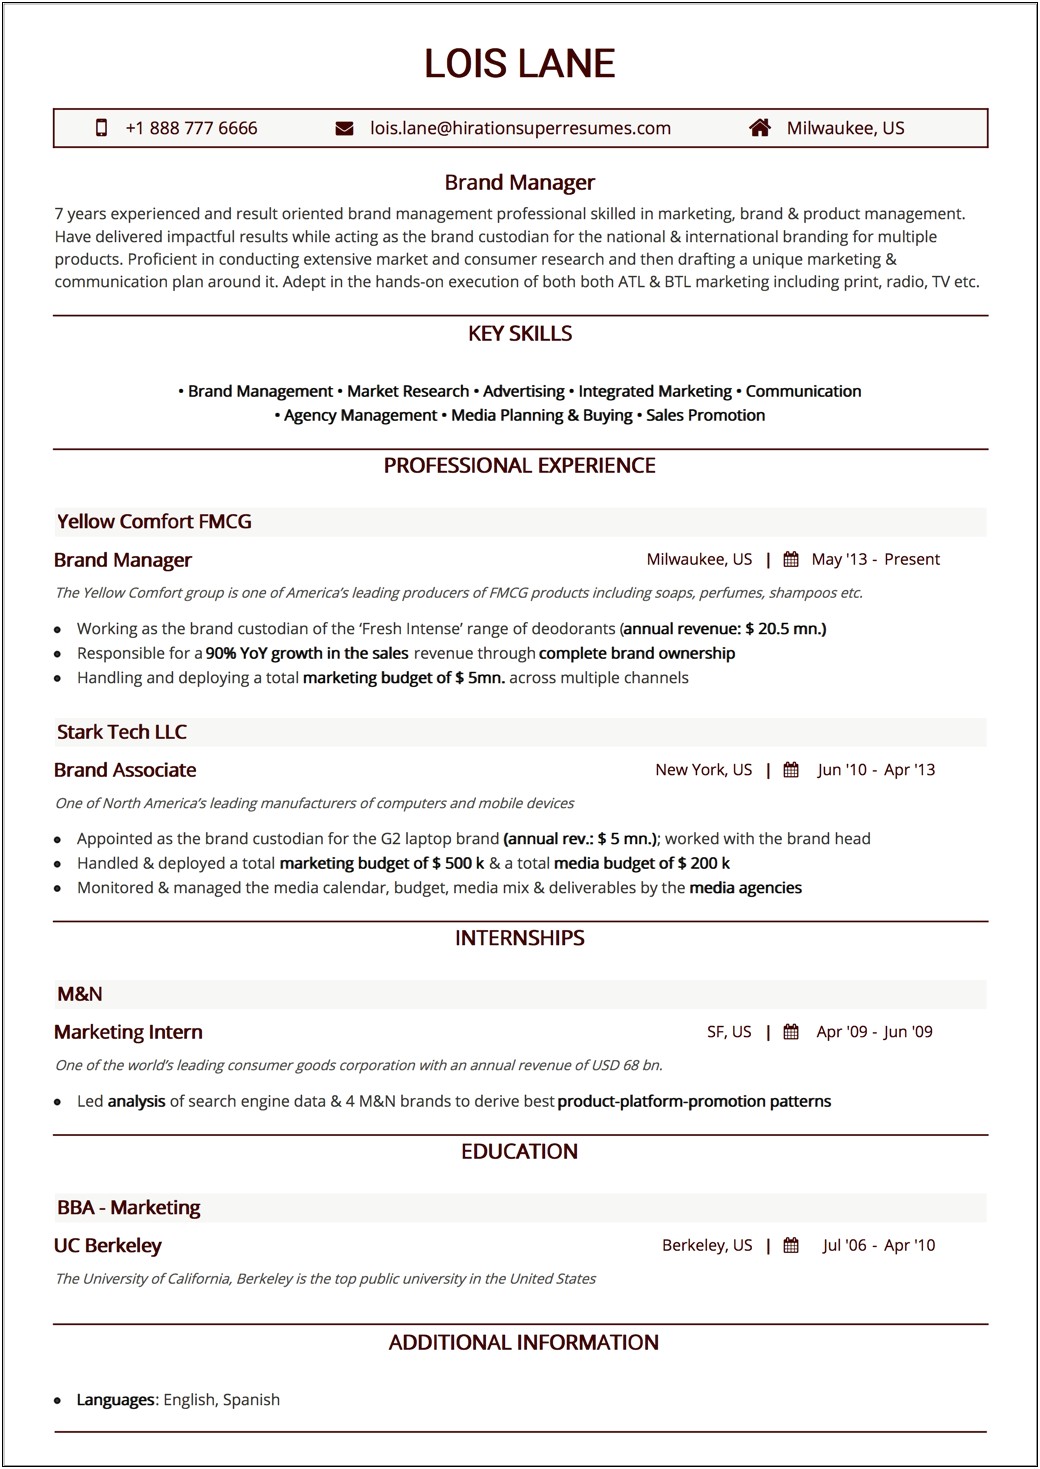 Experience With Budgeting And Managing Spending Resume